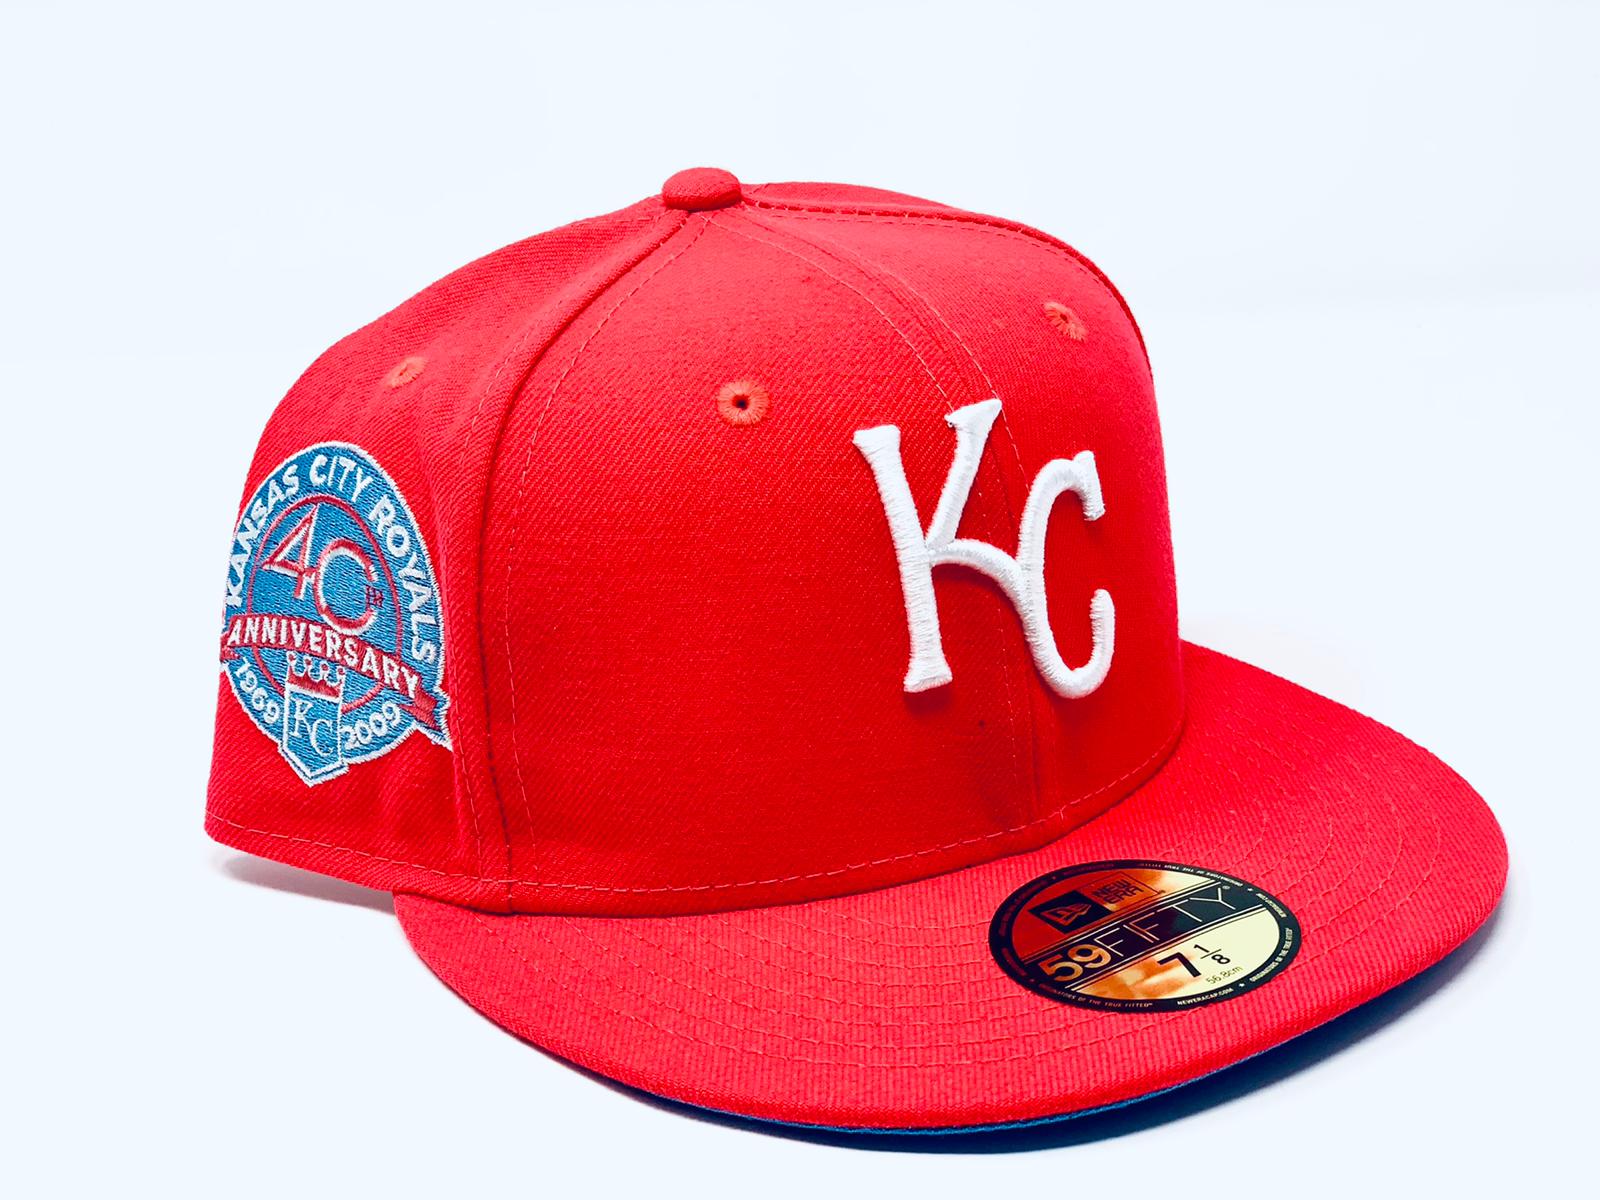 KANSAS CITY ROYALS FITTED HAT 80276616